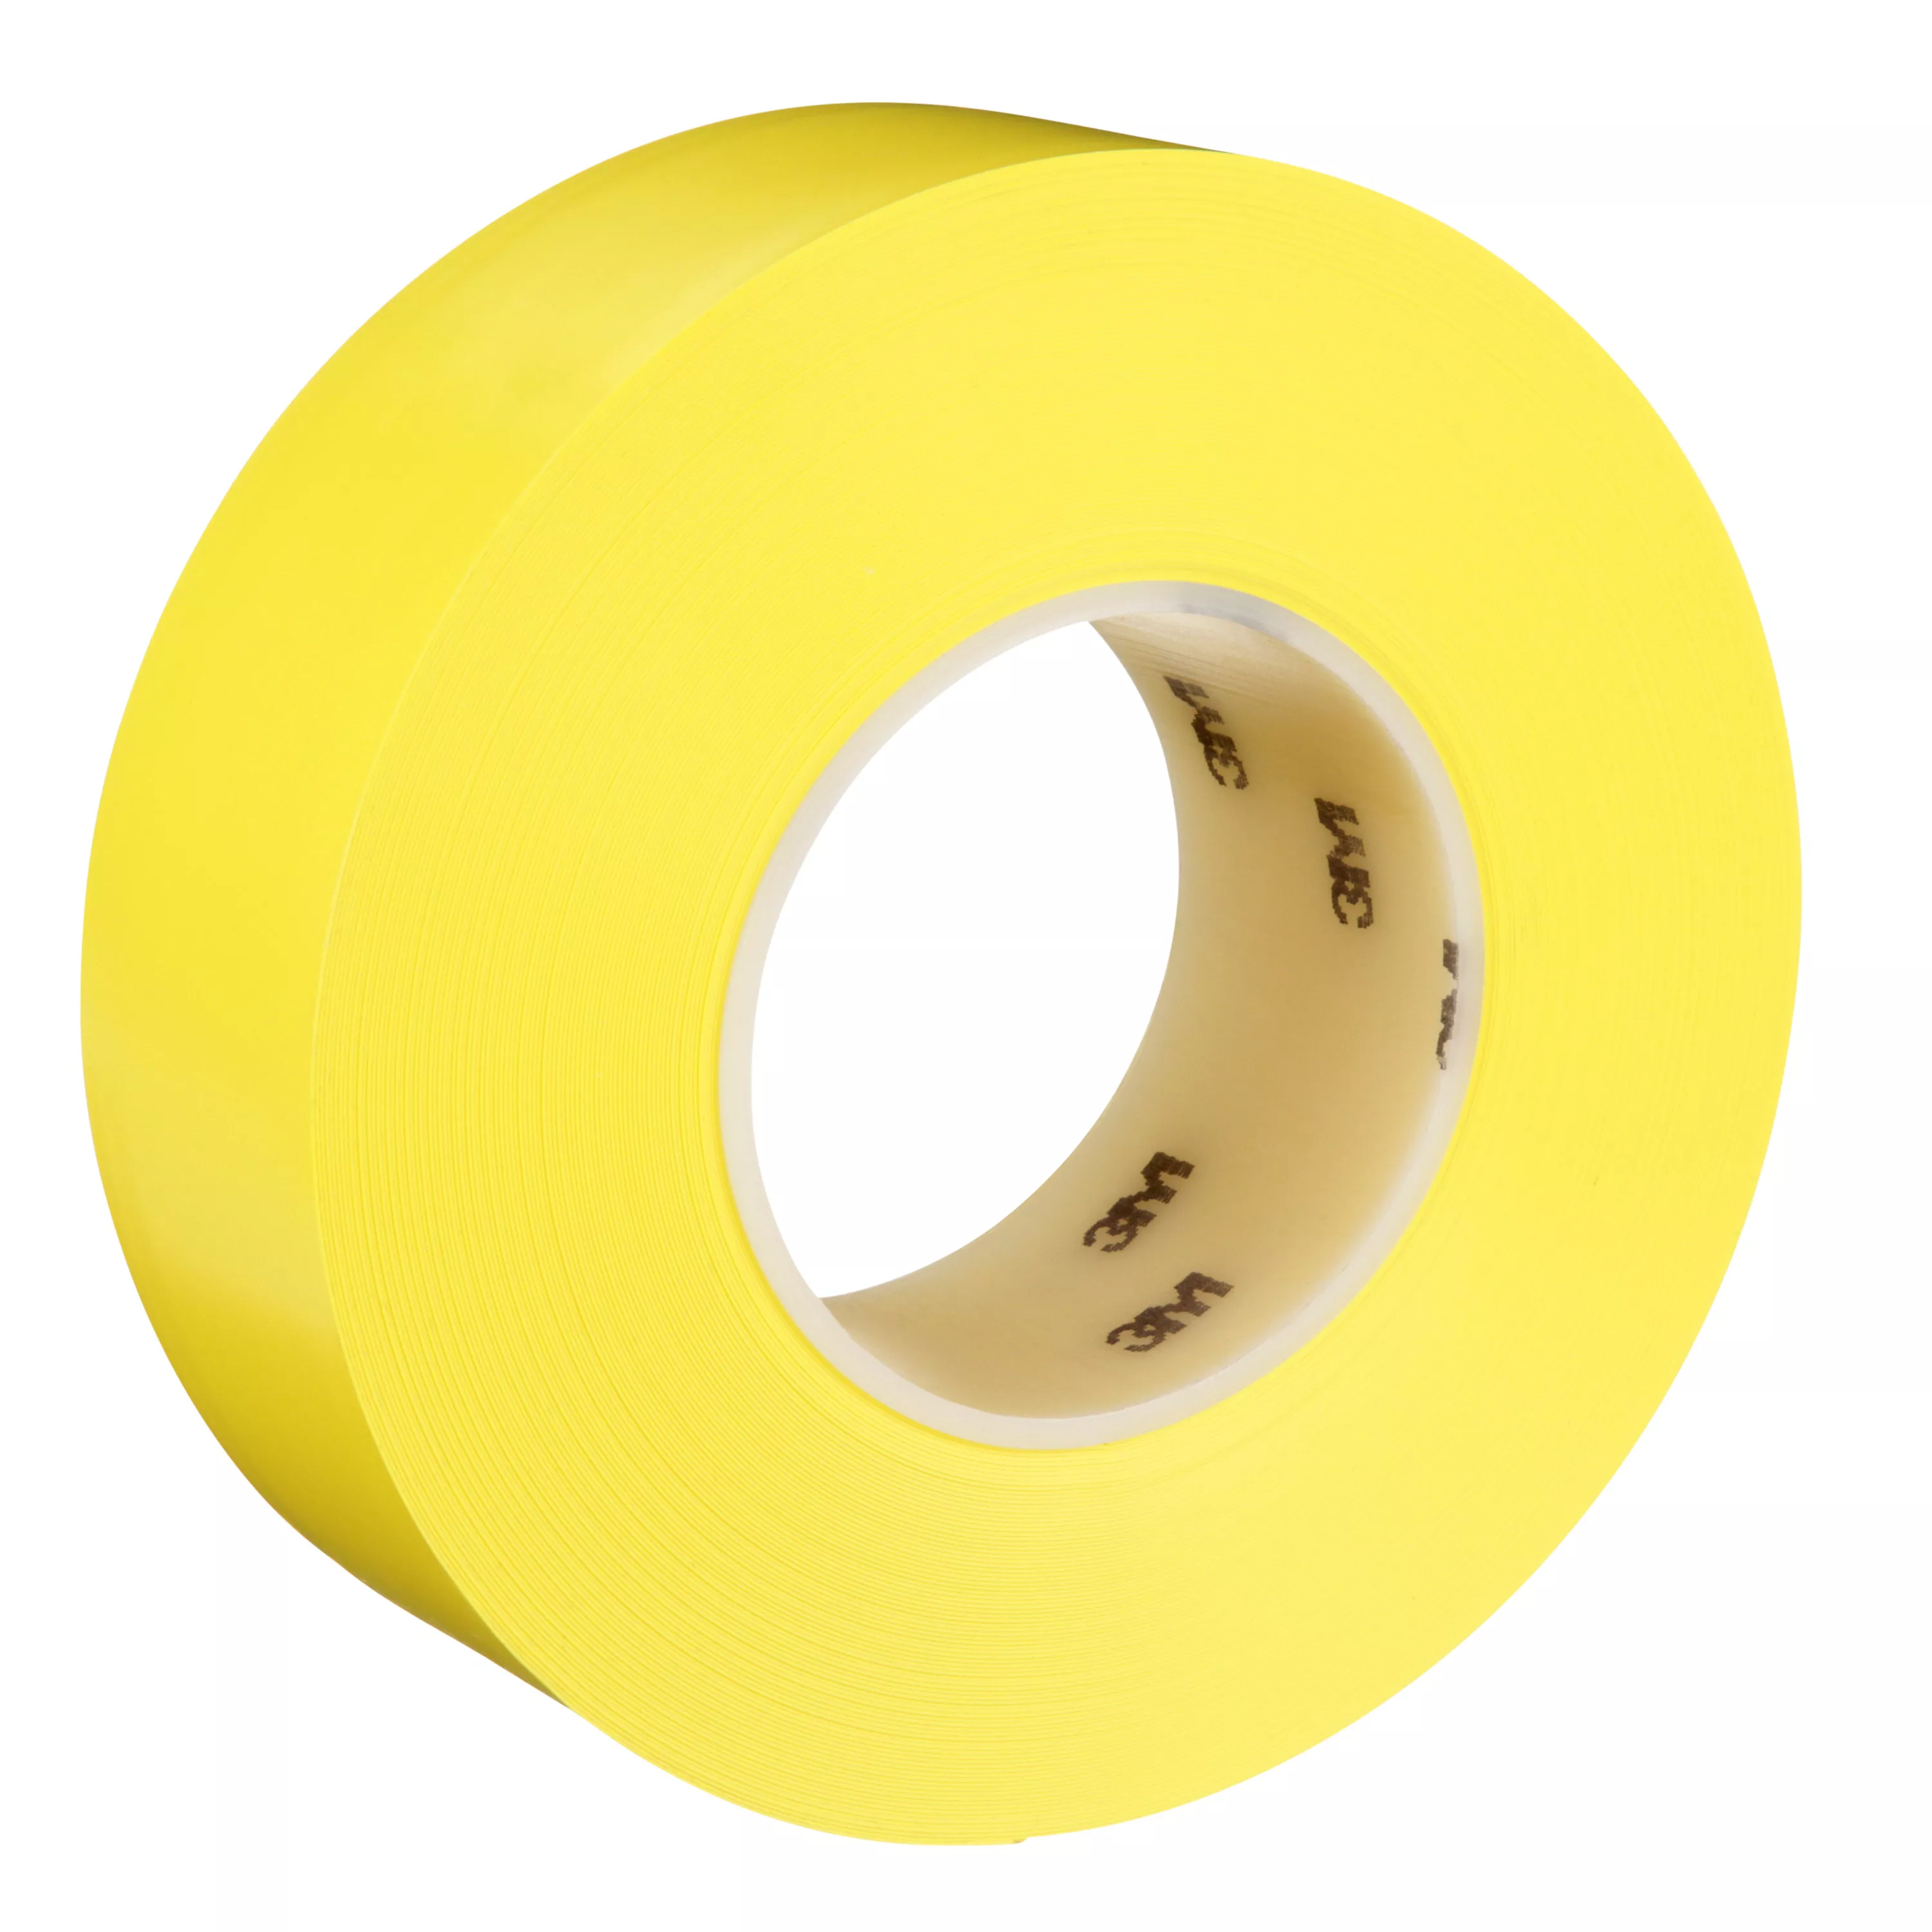 3M™ Durable Floor Marking Tape 971, Yellow, 2 in x 36 yd, 17 mil, 6
Roll/Case, Individually Wrapped Conveniently Packaged